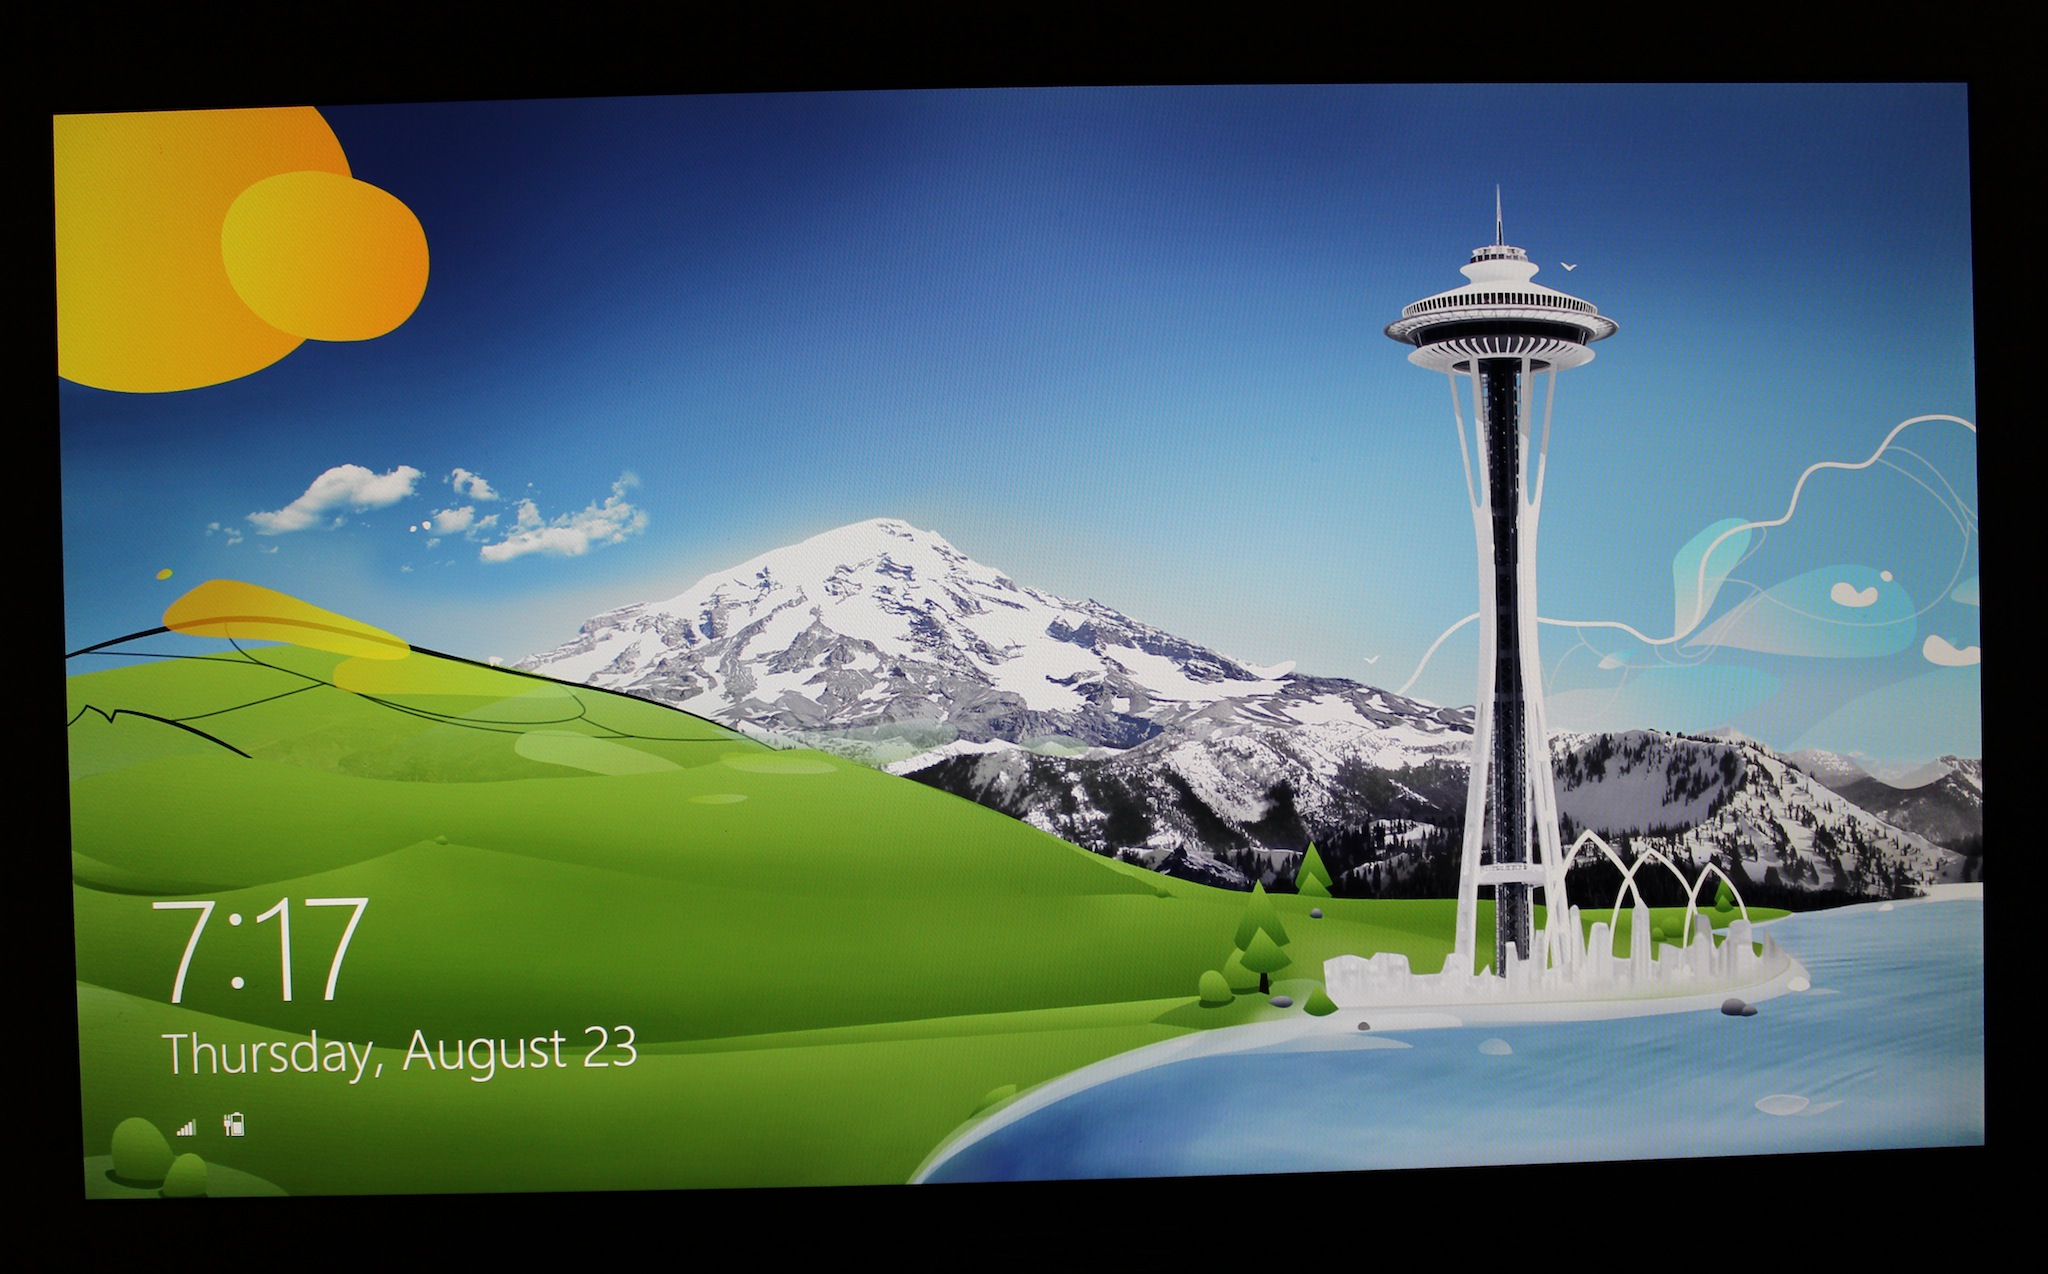  on using one of the colorful login screen wallpapers from Windows 8